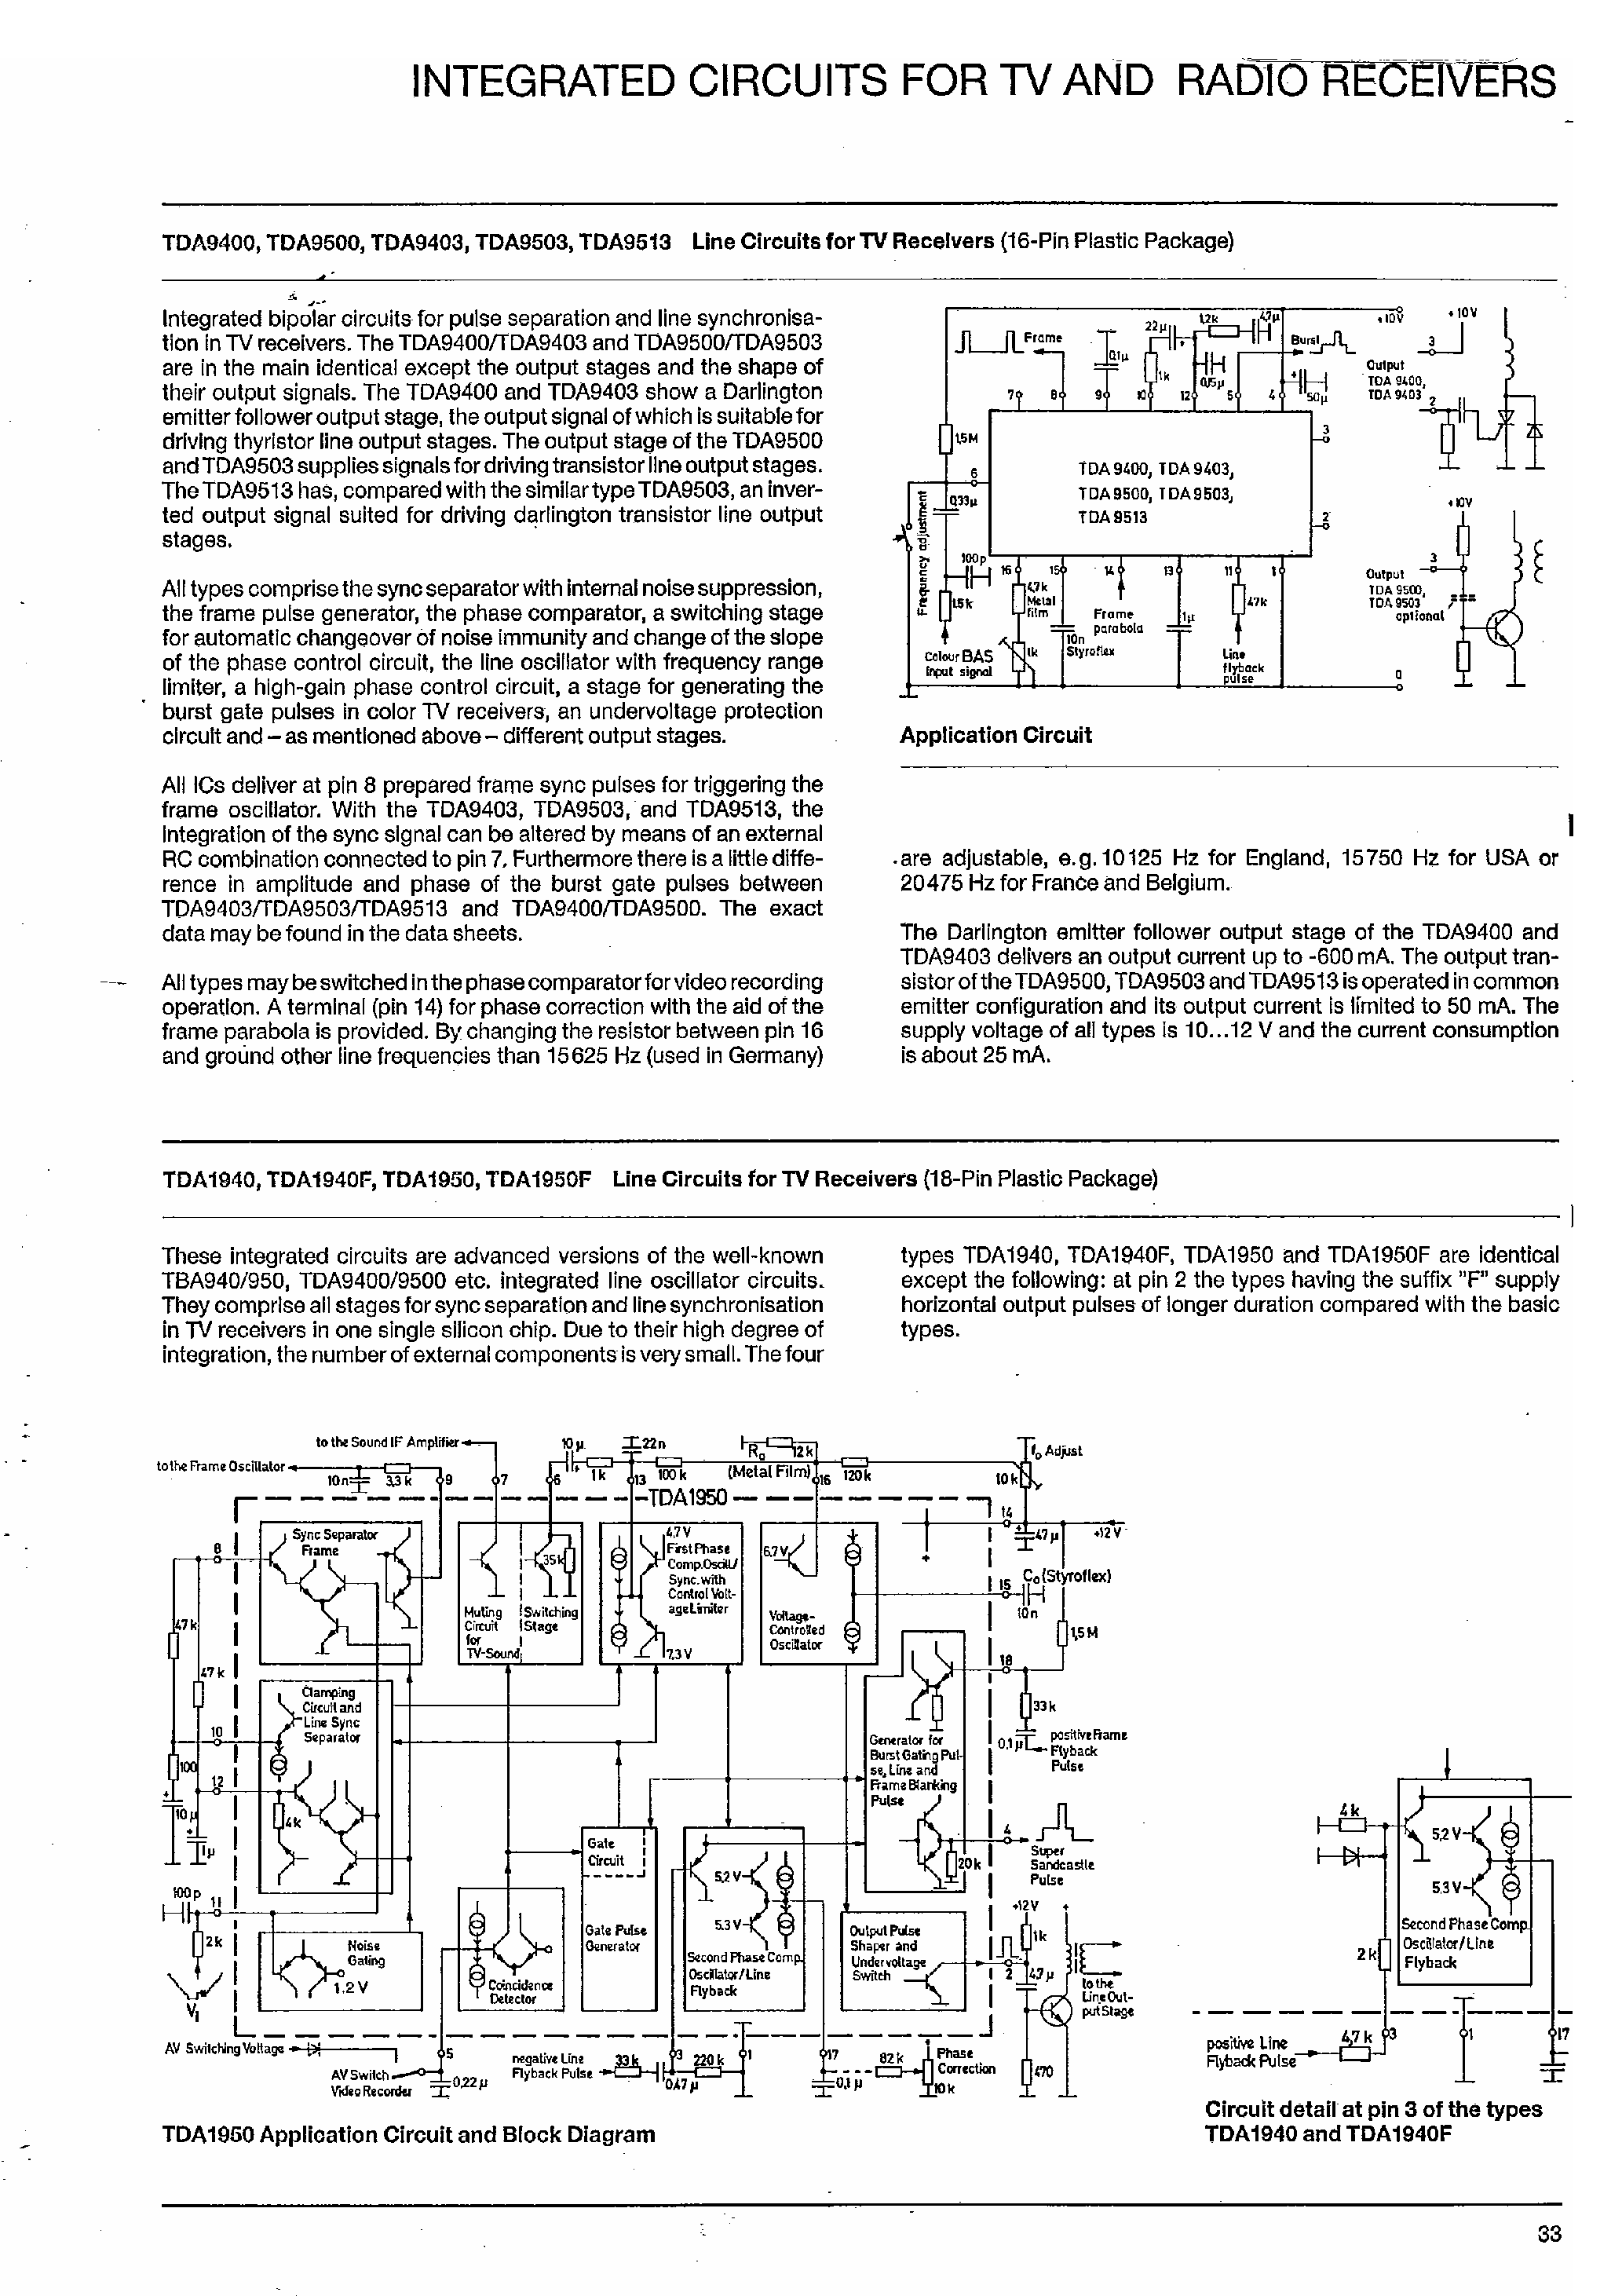 Datasheet TDA1950 - Integrated Circuits for TV and Radio Receivers page 1